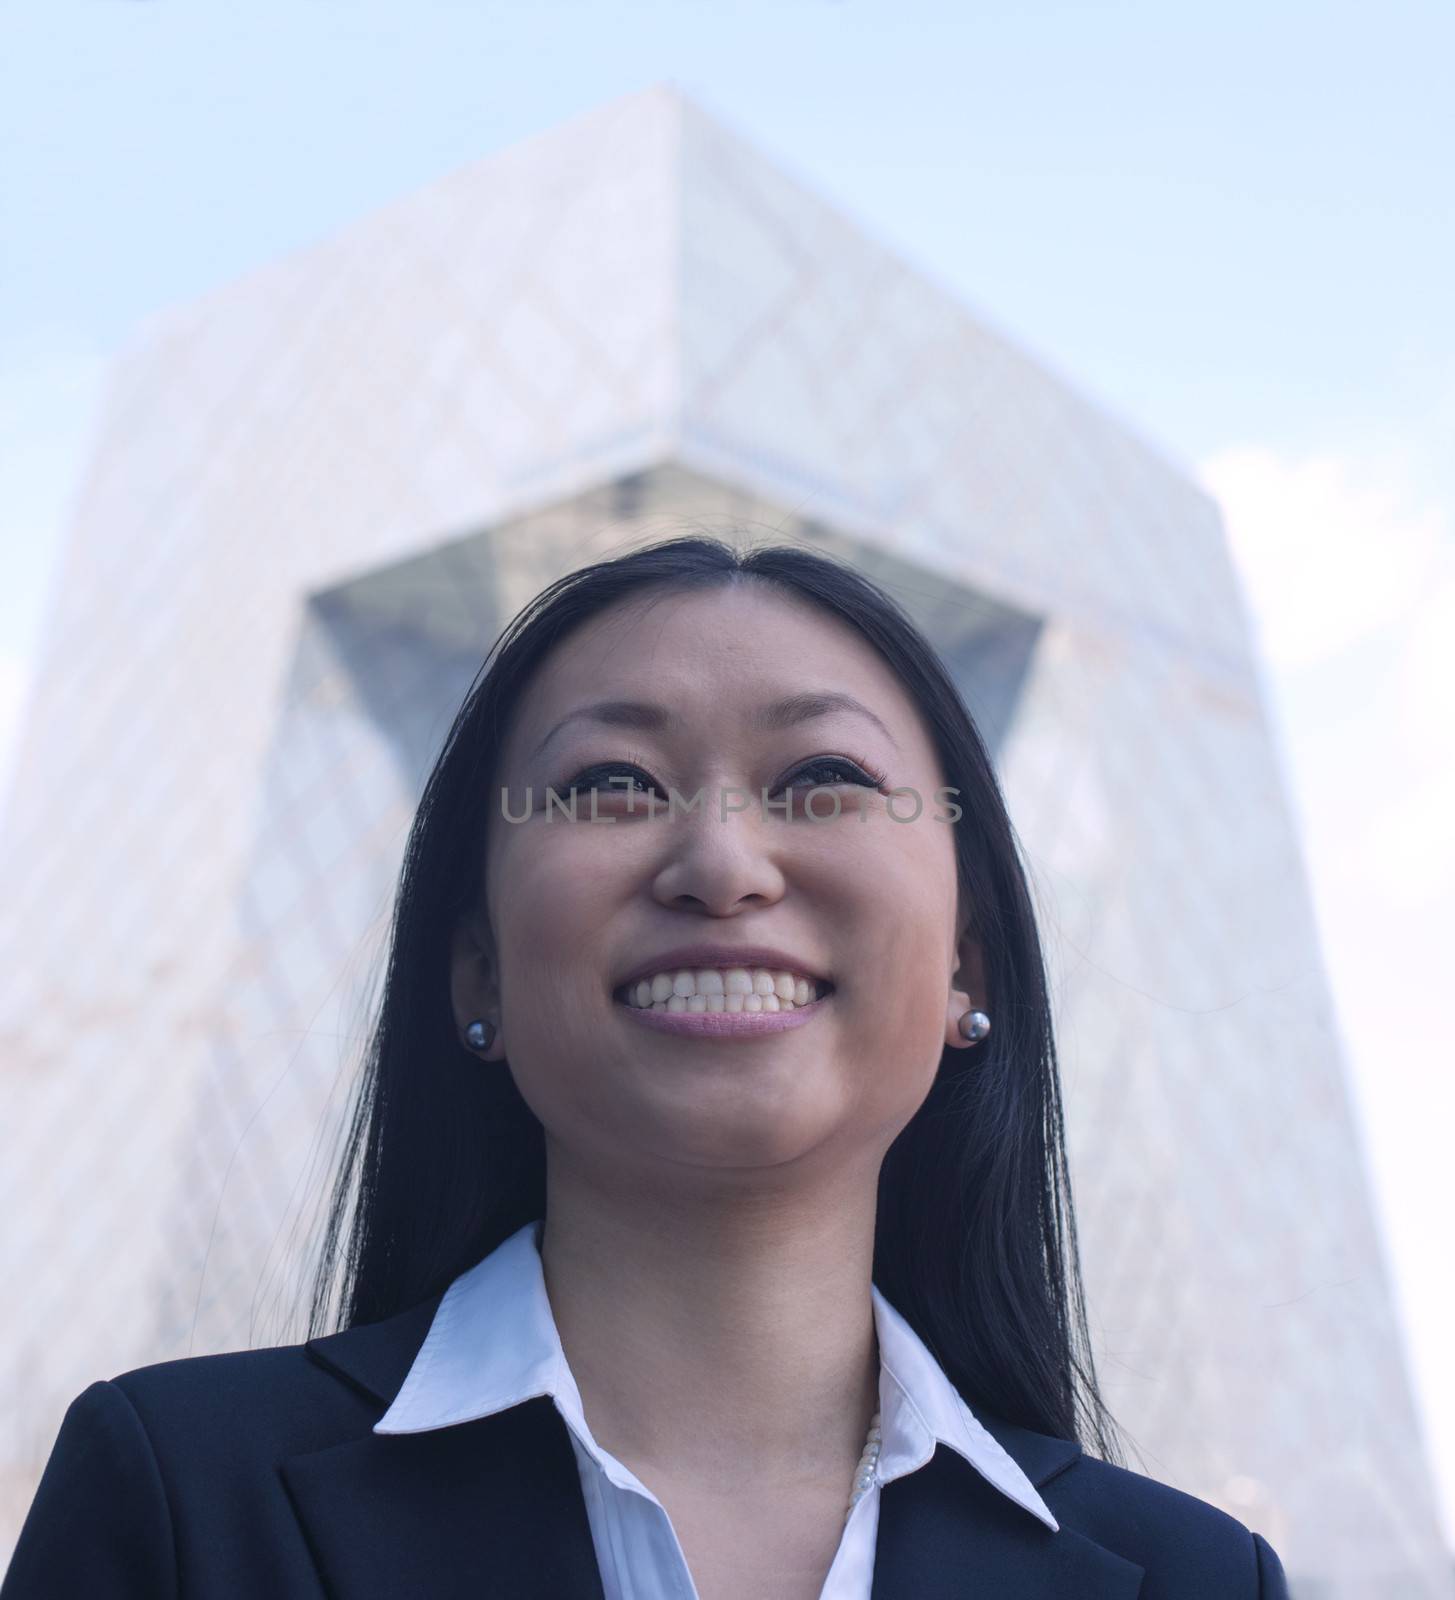 Portrait of smiling young businesswoman with the CCTV building in background, Beijing